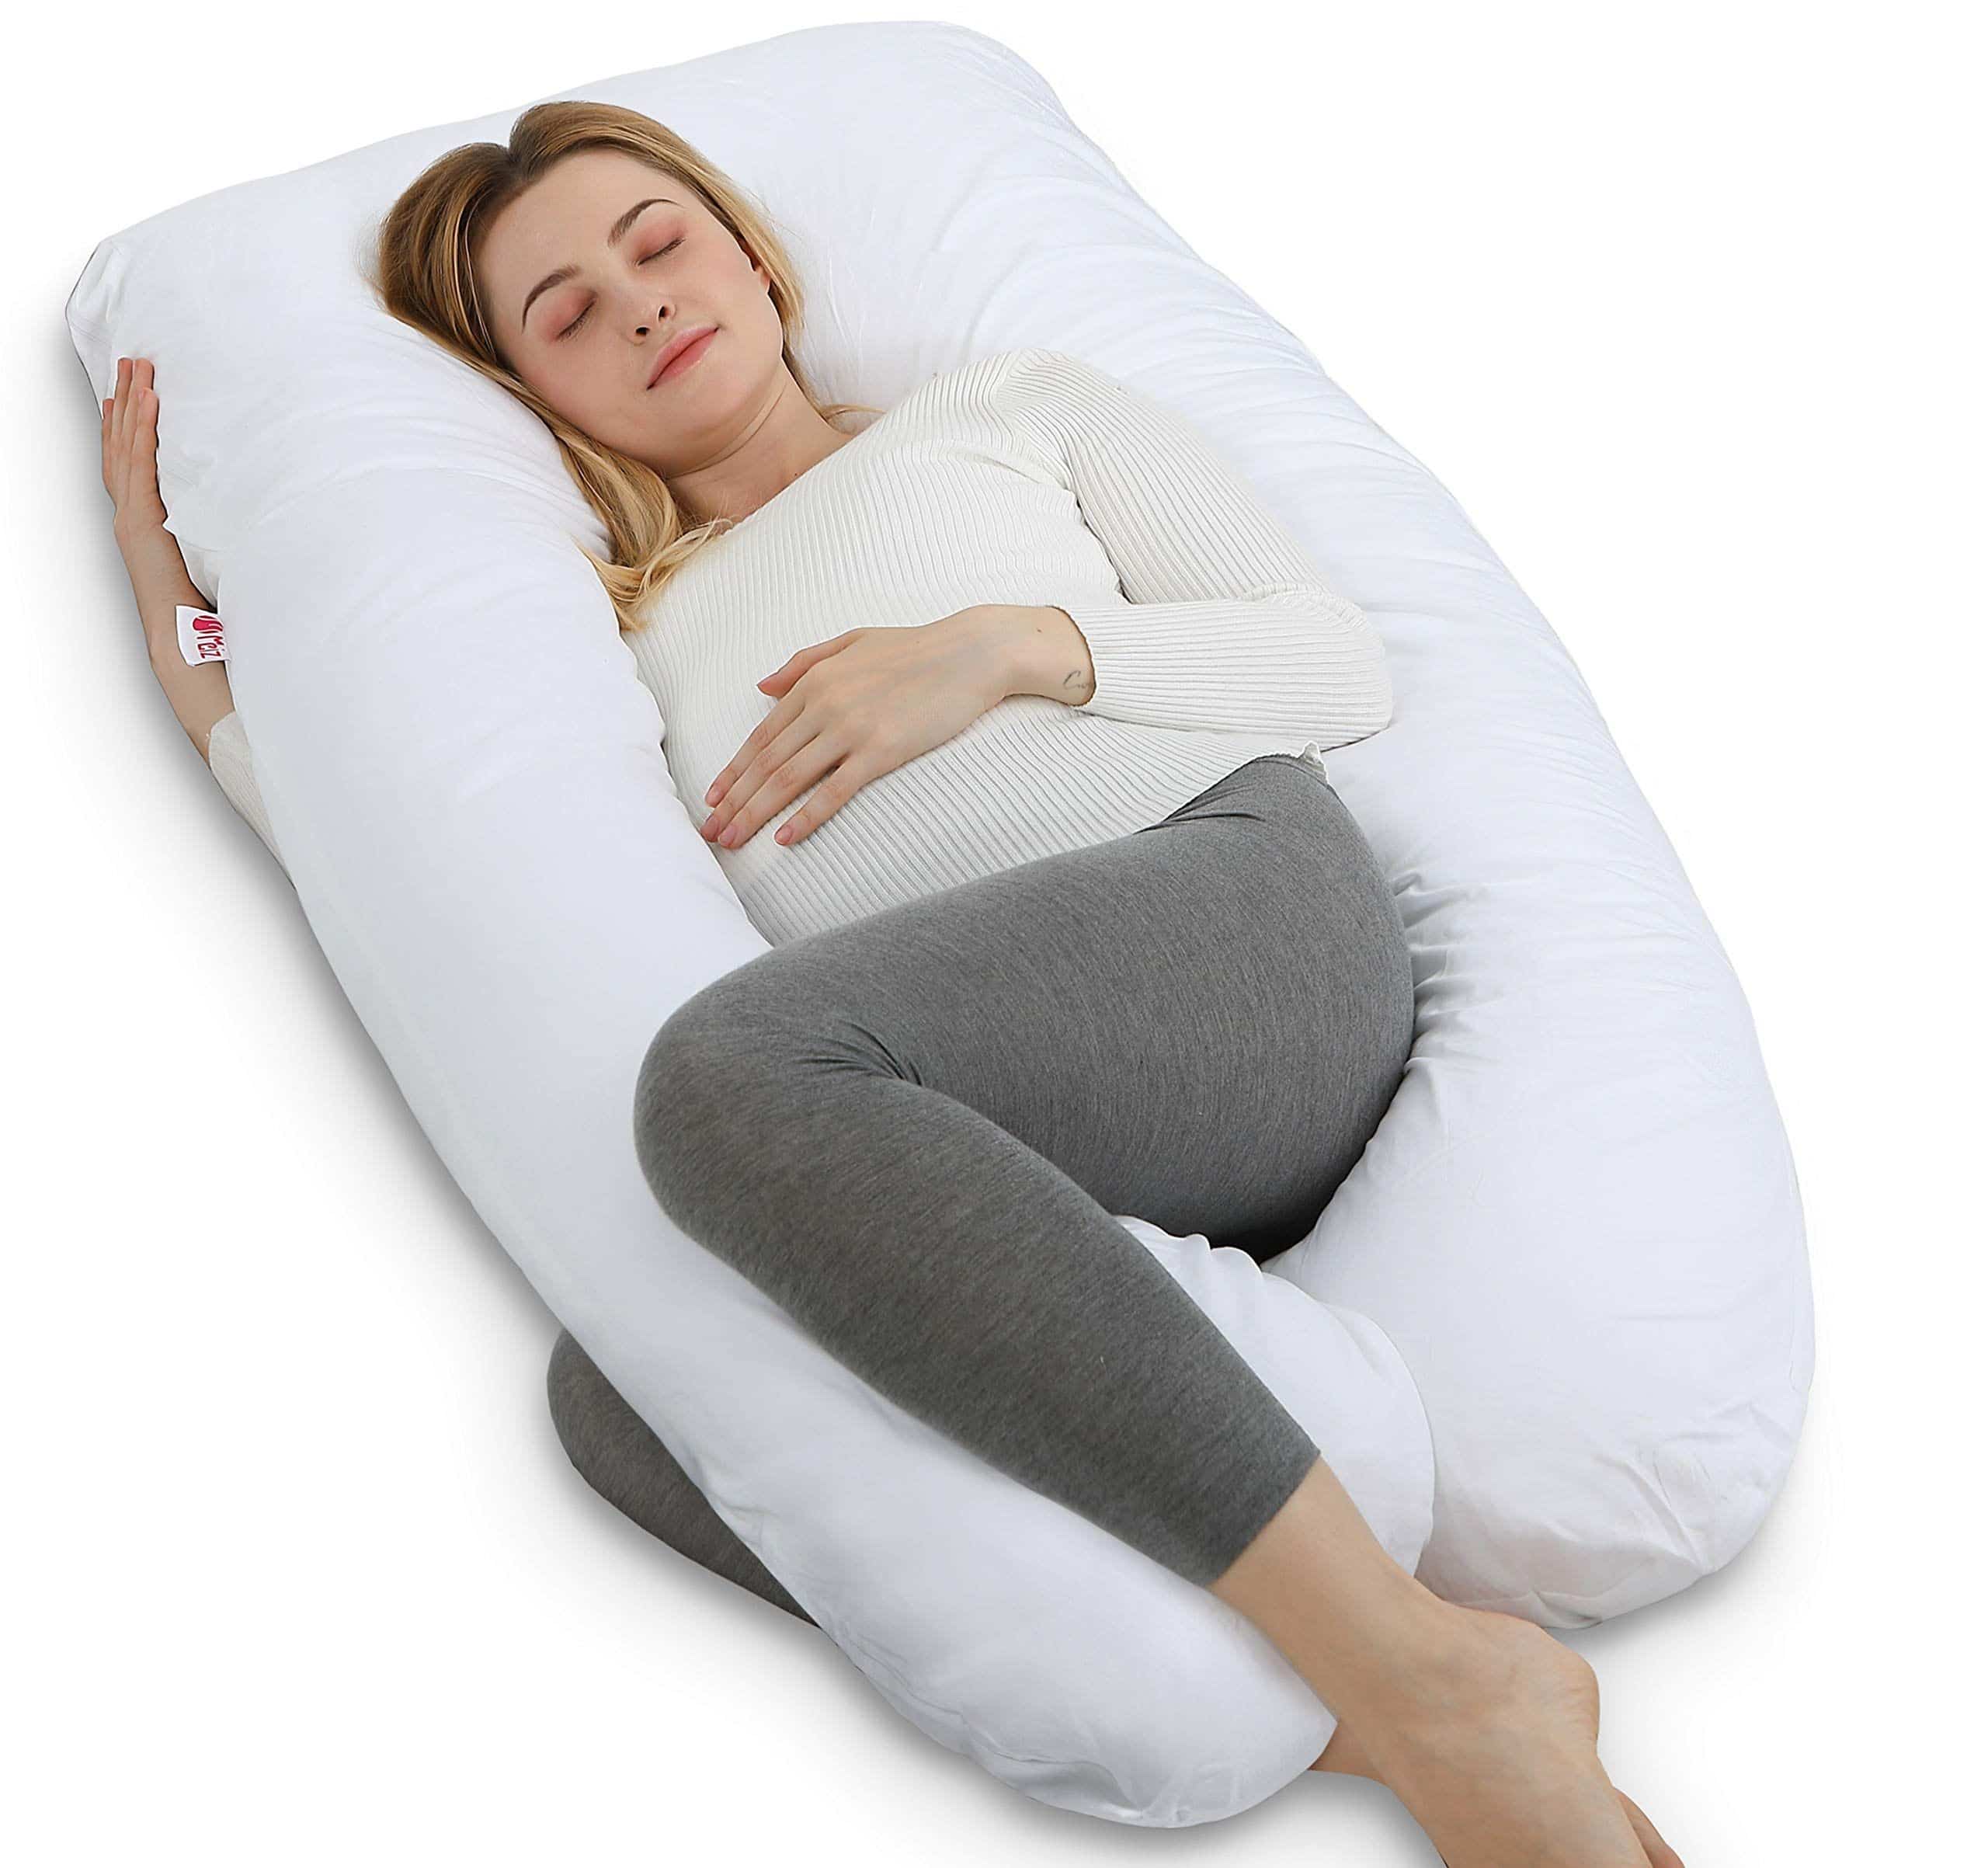 The 15 best pregnancy pillows for a comfortable sleeping position